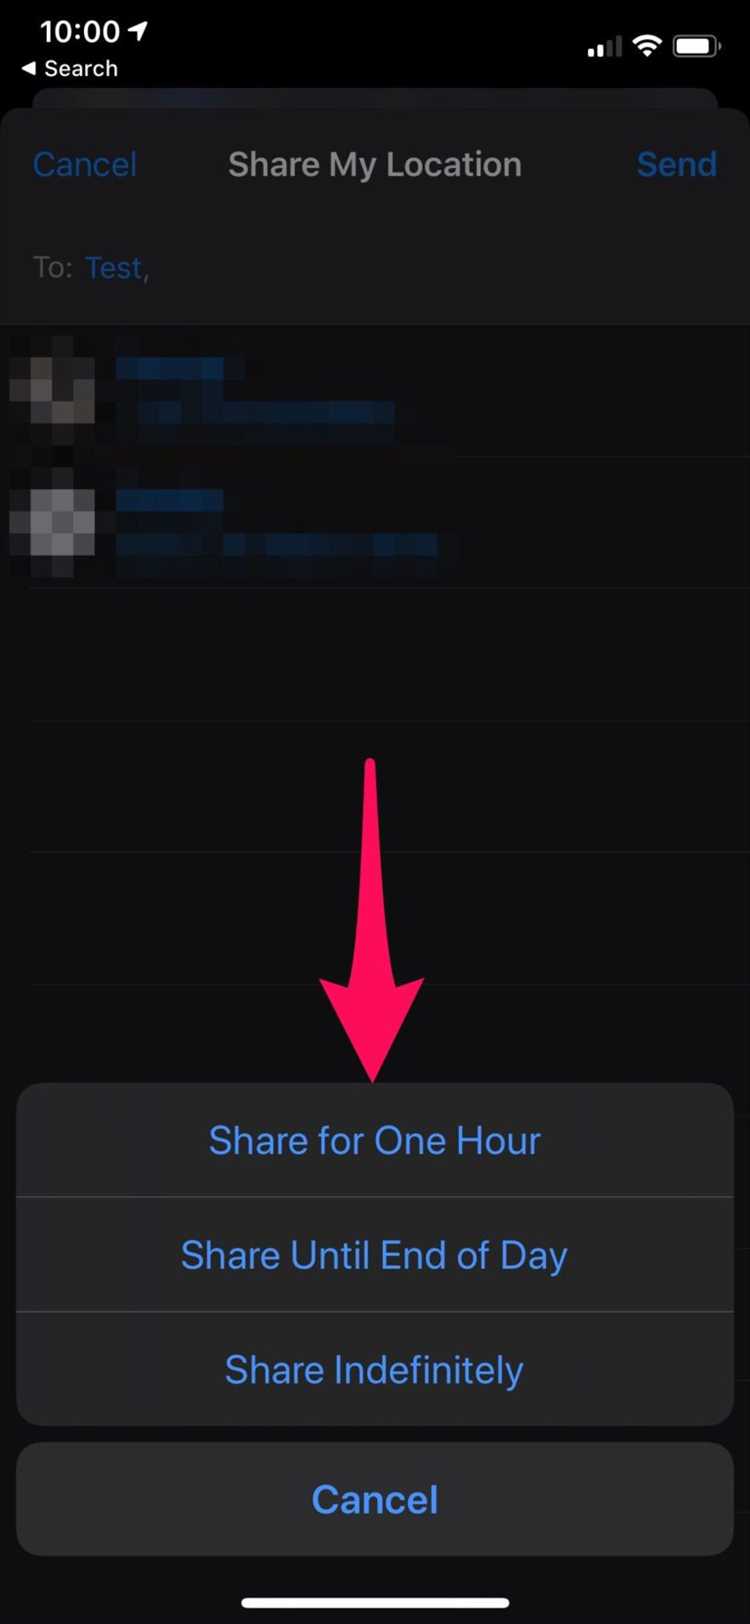 How location sharing notifications can be intrusive